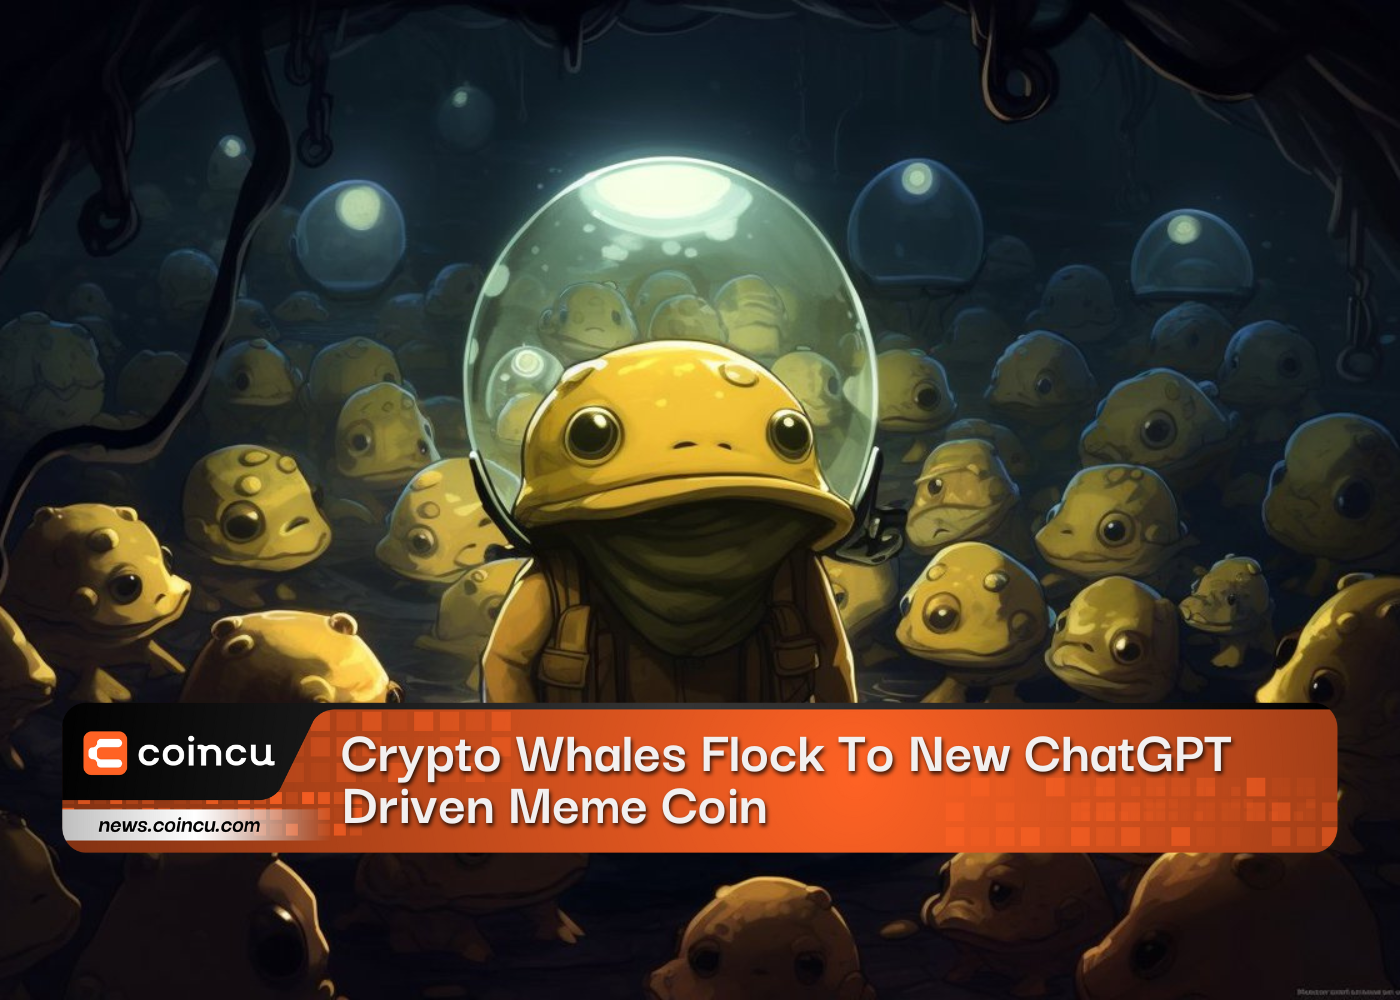 Crypto Whales Flock To New ChatGPT